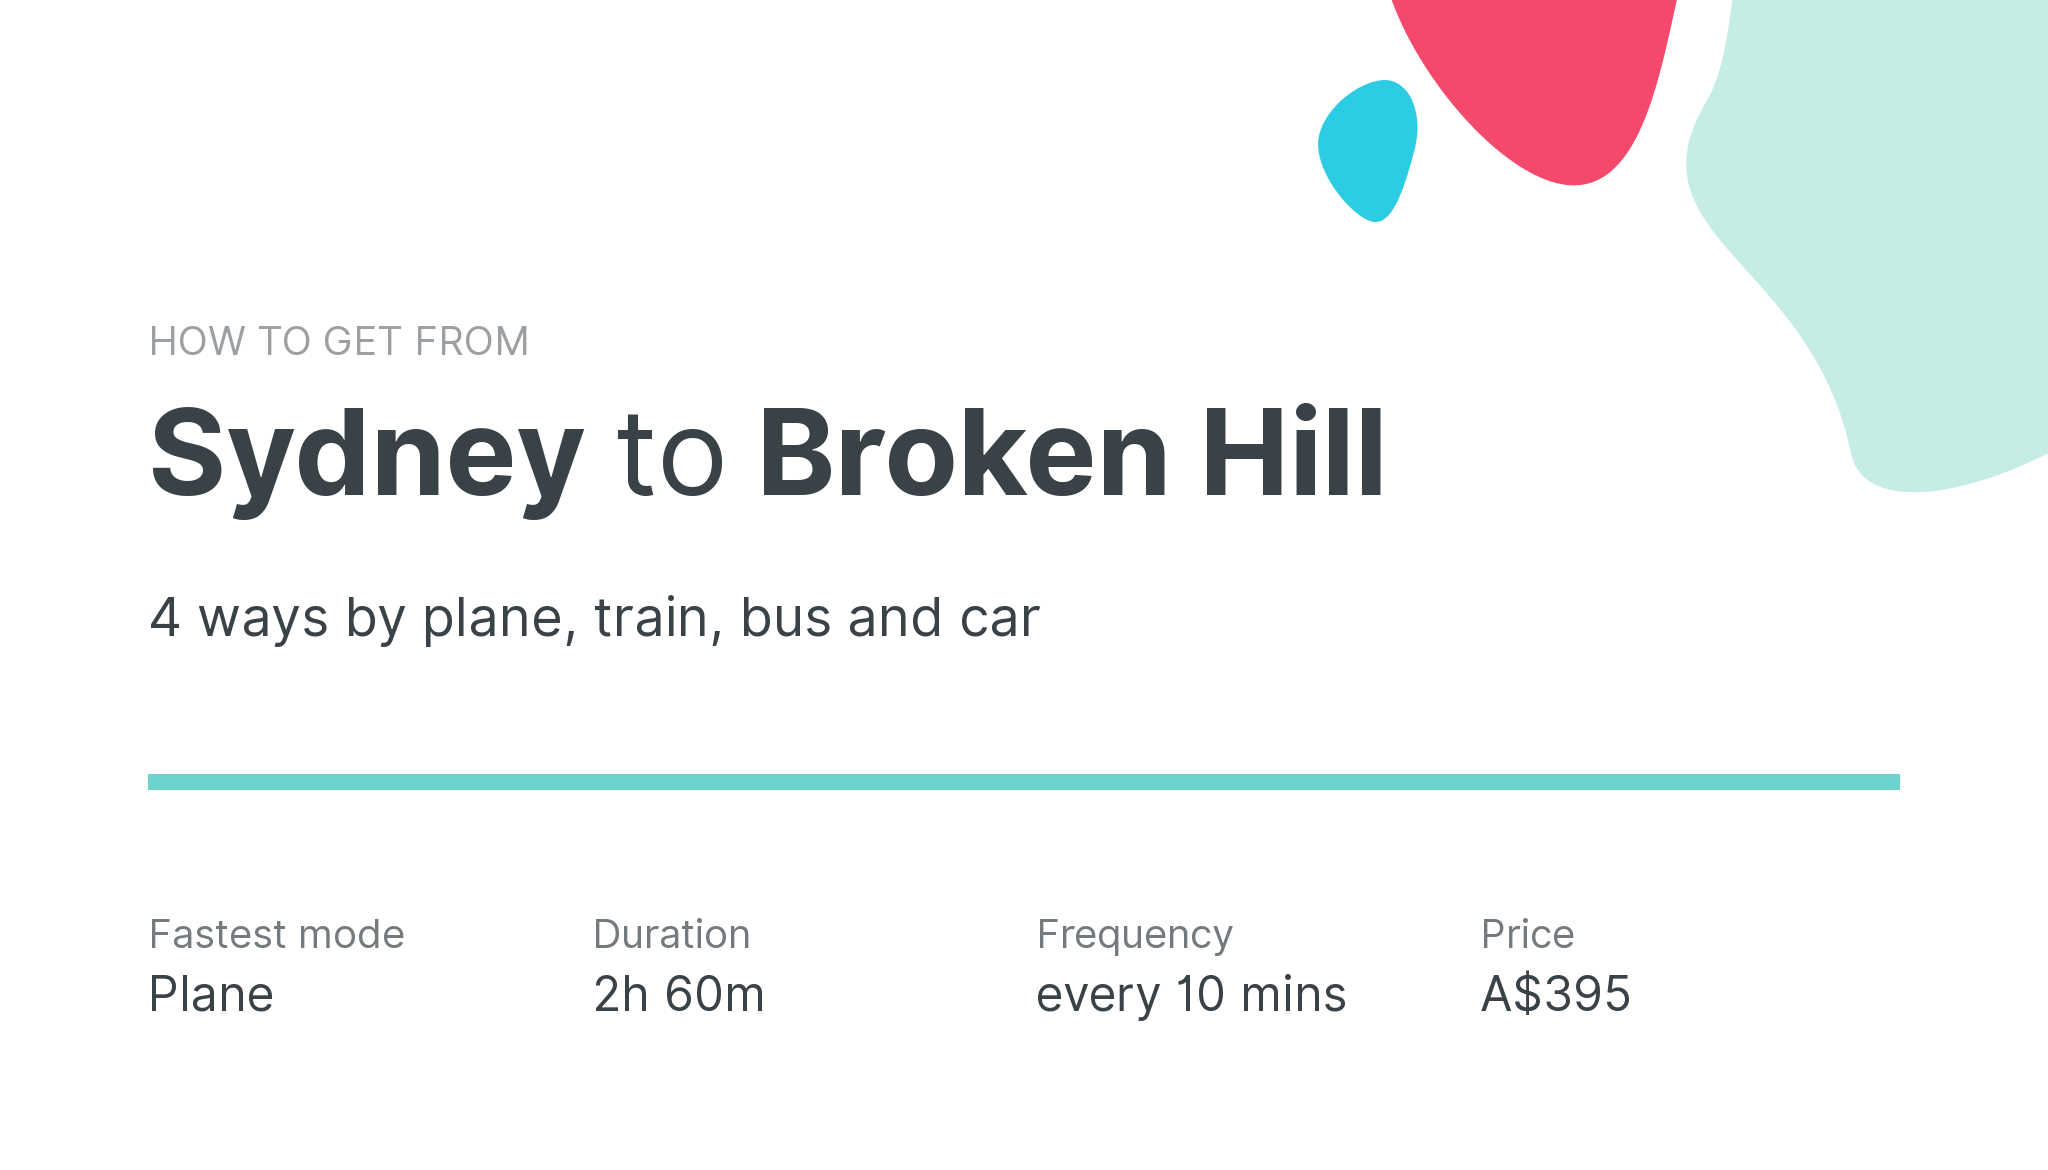 How do I get from Sydney to Broken Hill